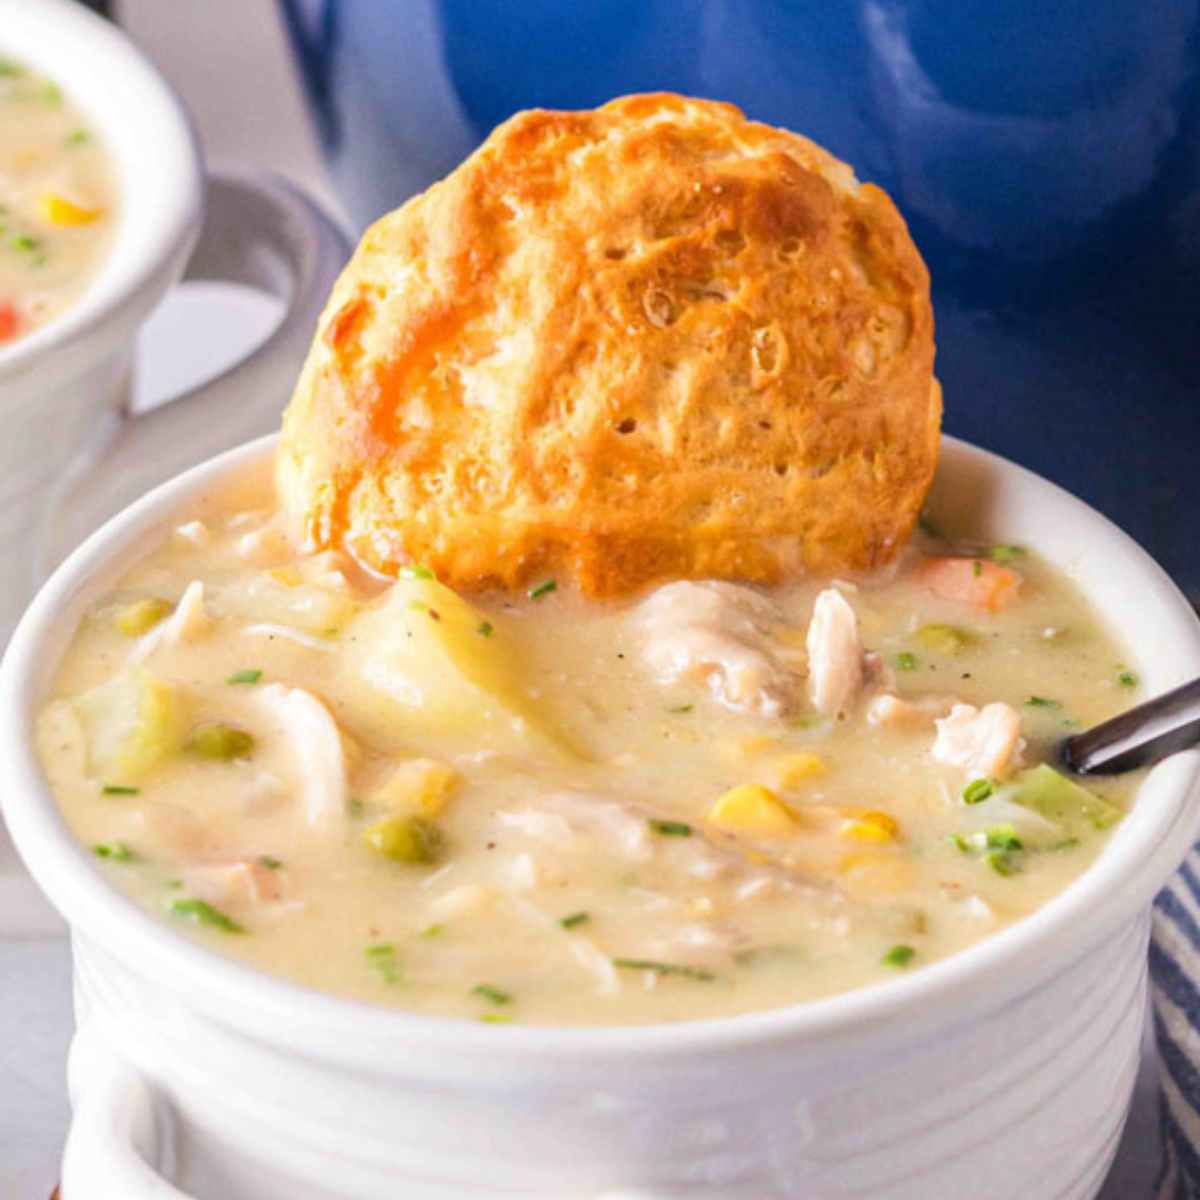 Chicken pot pie soup in a white bowl with a biscuit.